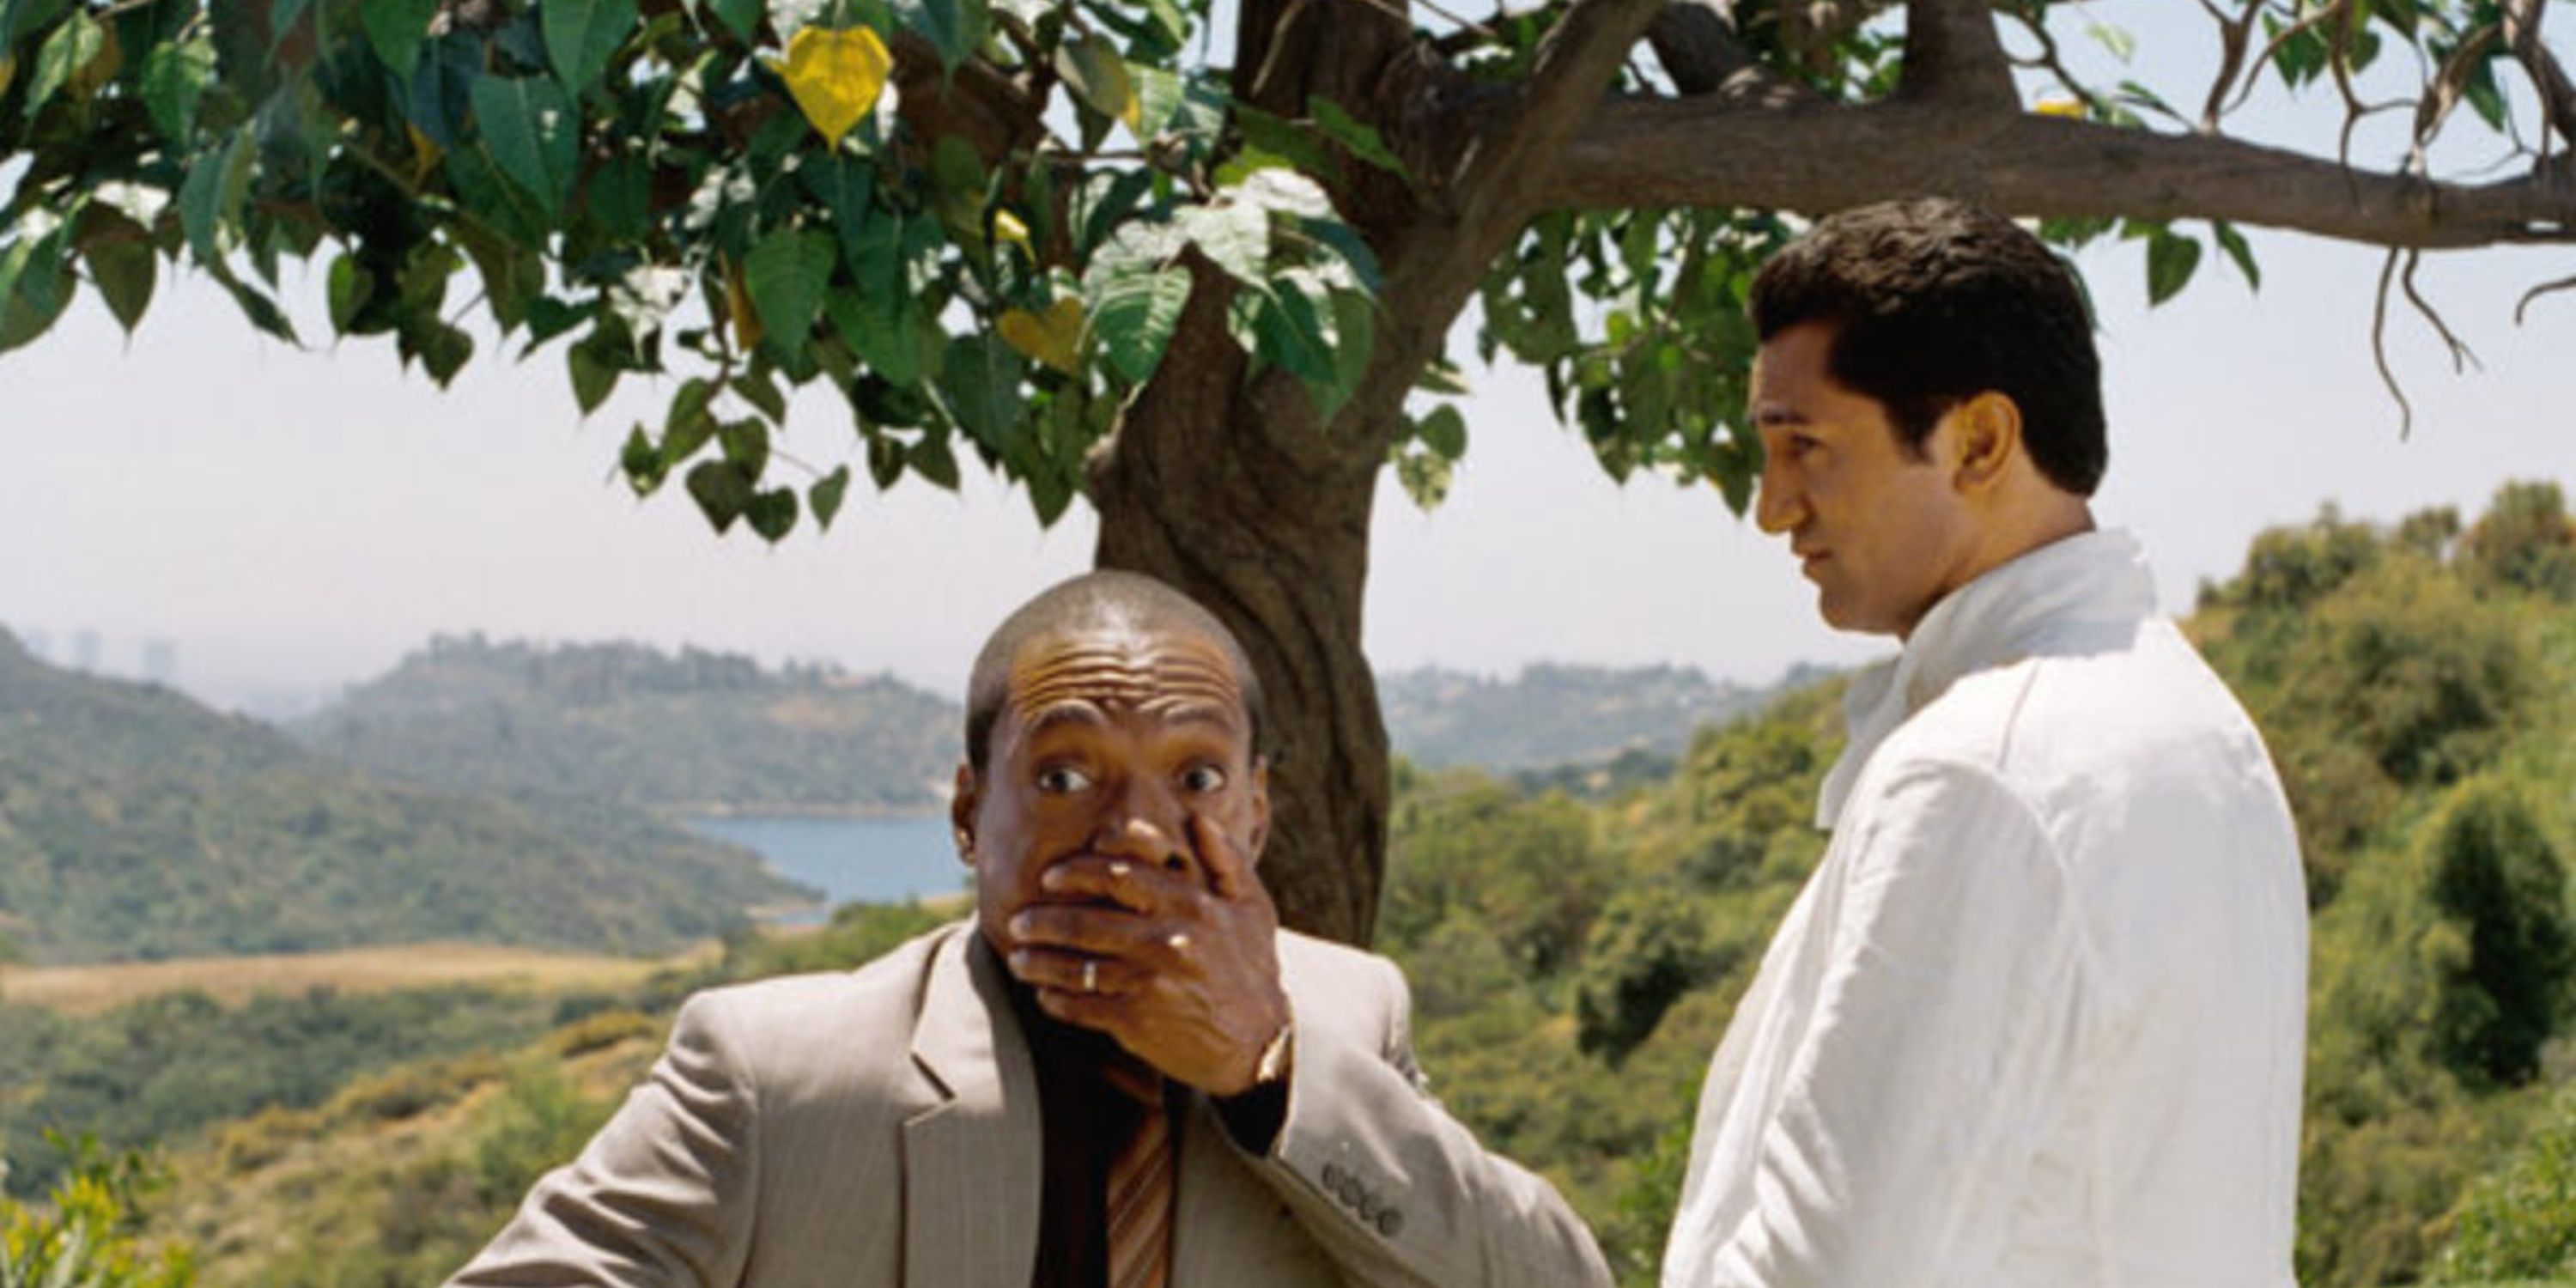 two men standing infront of a tree: the man in the center is shocked, covering his mouth, while the other looks on.